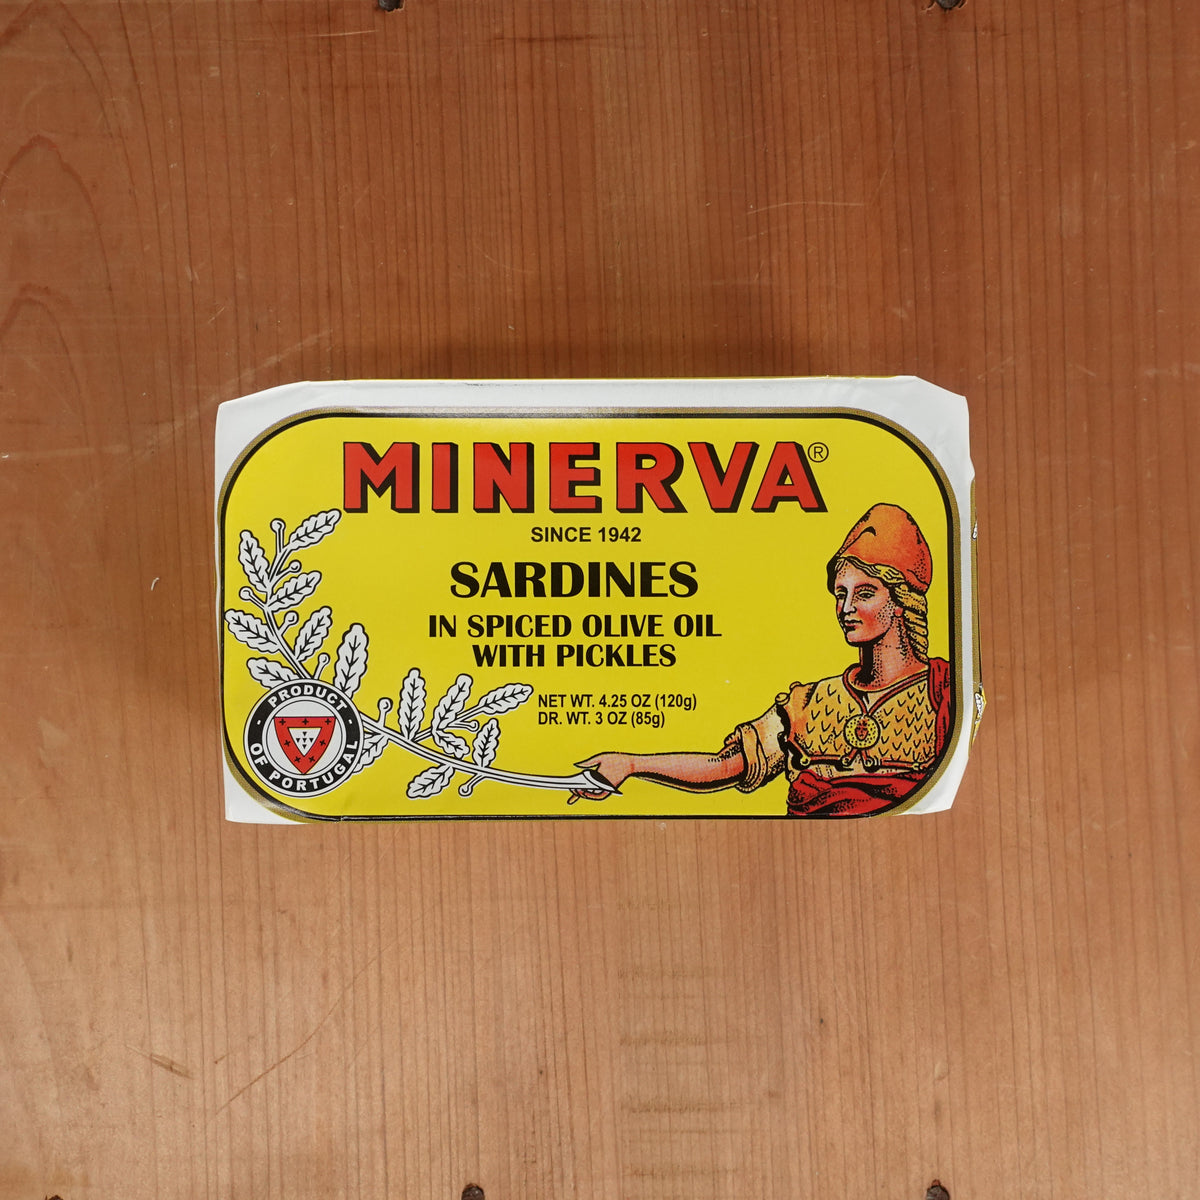 Minerva Sardines in Spiced Olive Oil with Pickles - 120g